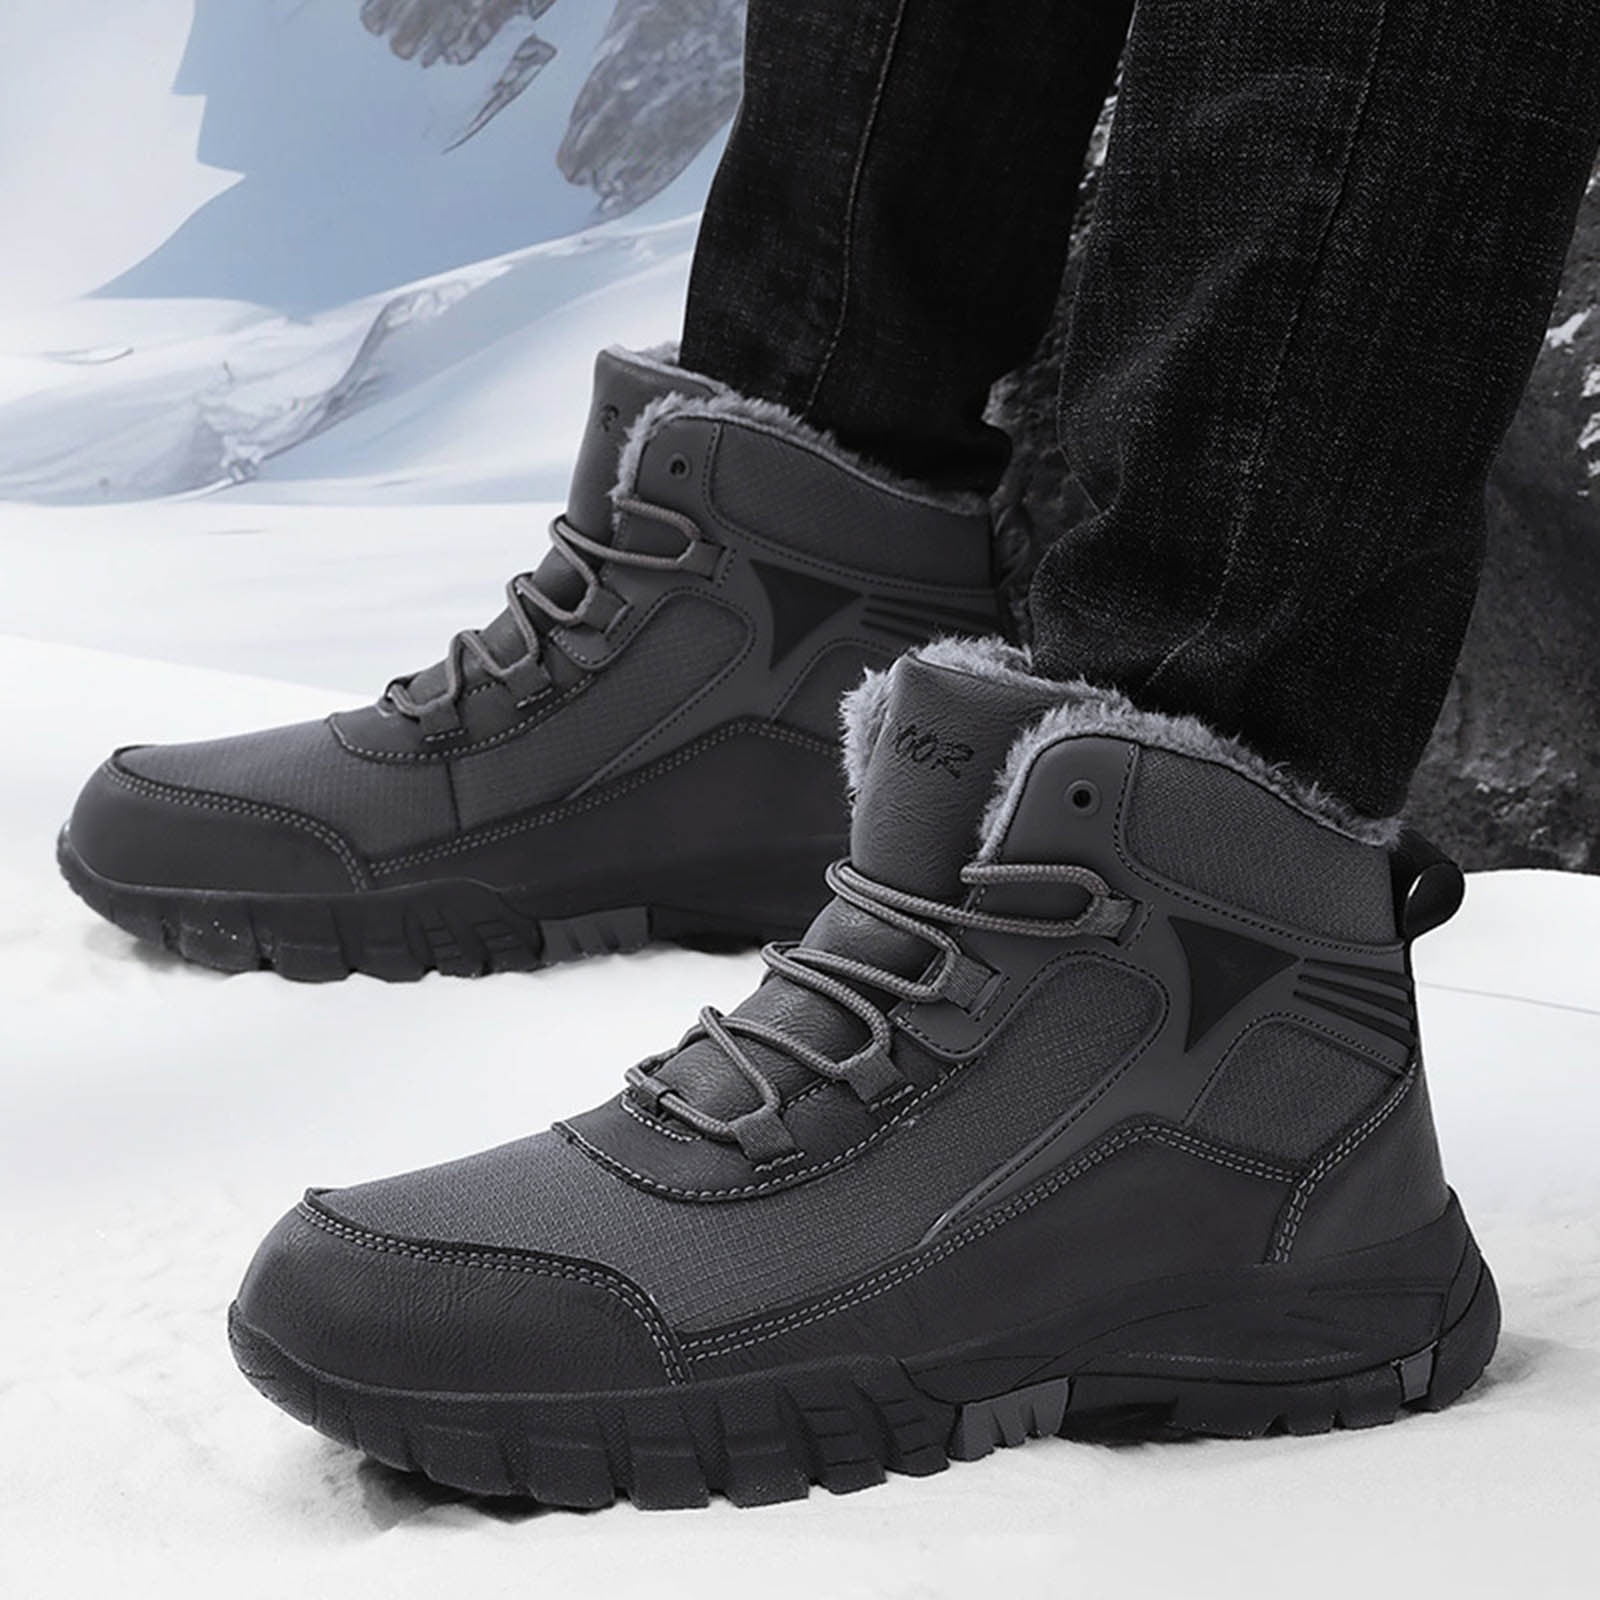 HTNBO Winter Boots for Men Warm Fleece Lined Snow Boots Comfy Durable ...